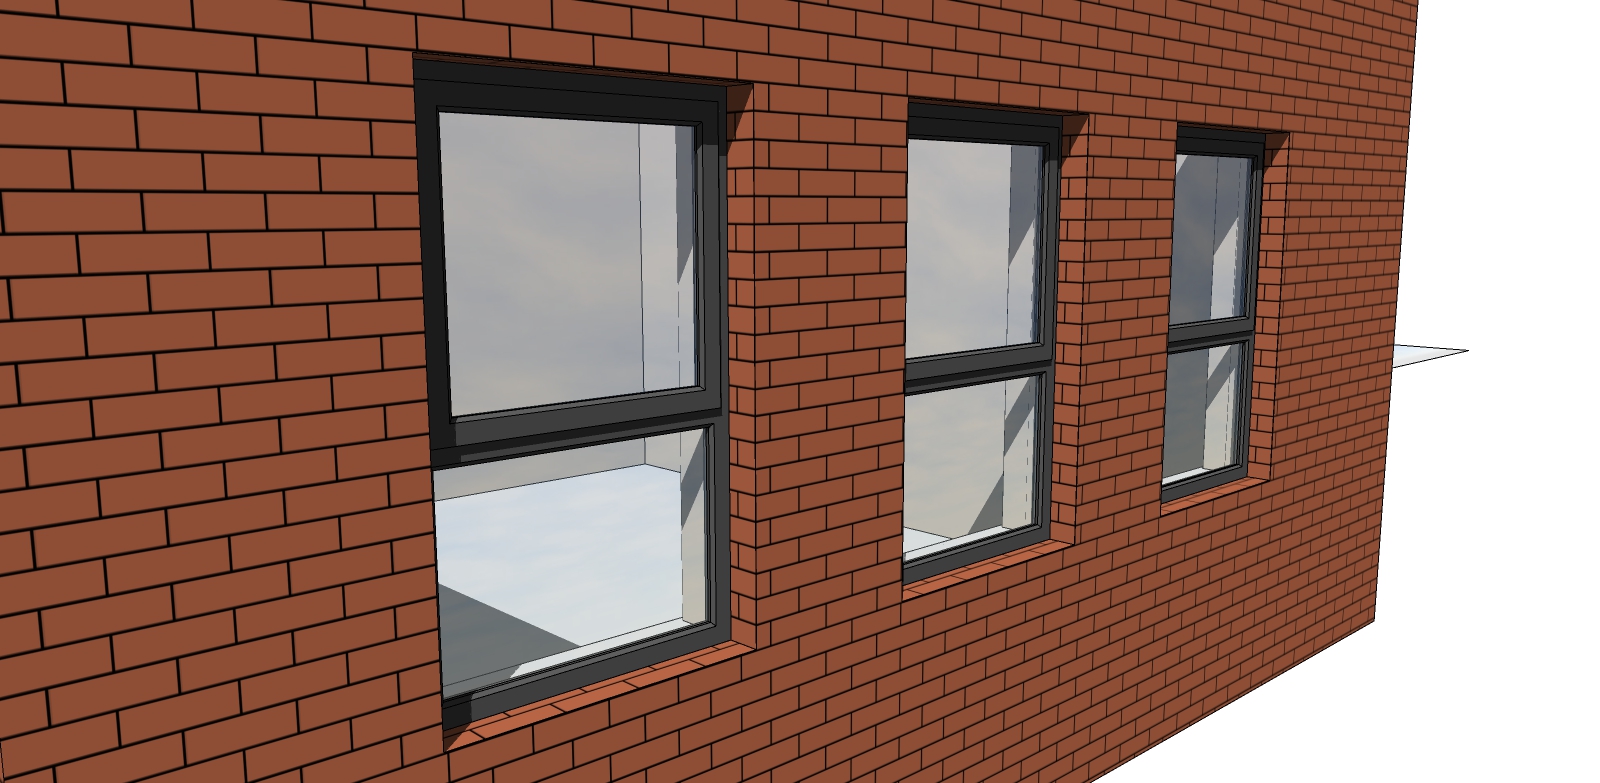 All three windows exploded, all walls cut & 2D elements deleted/layer off